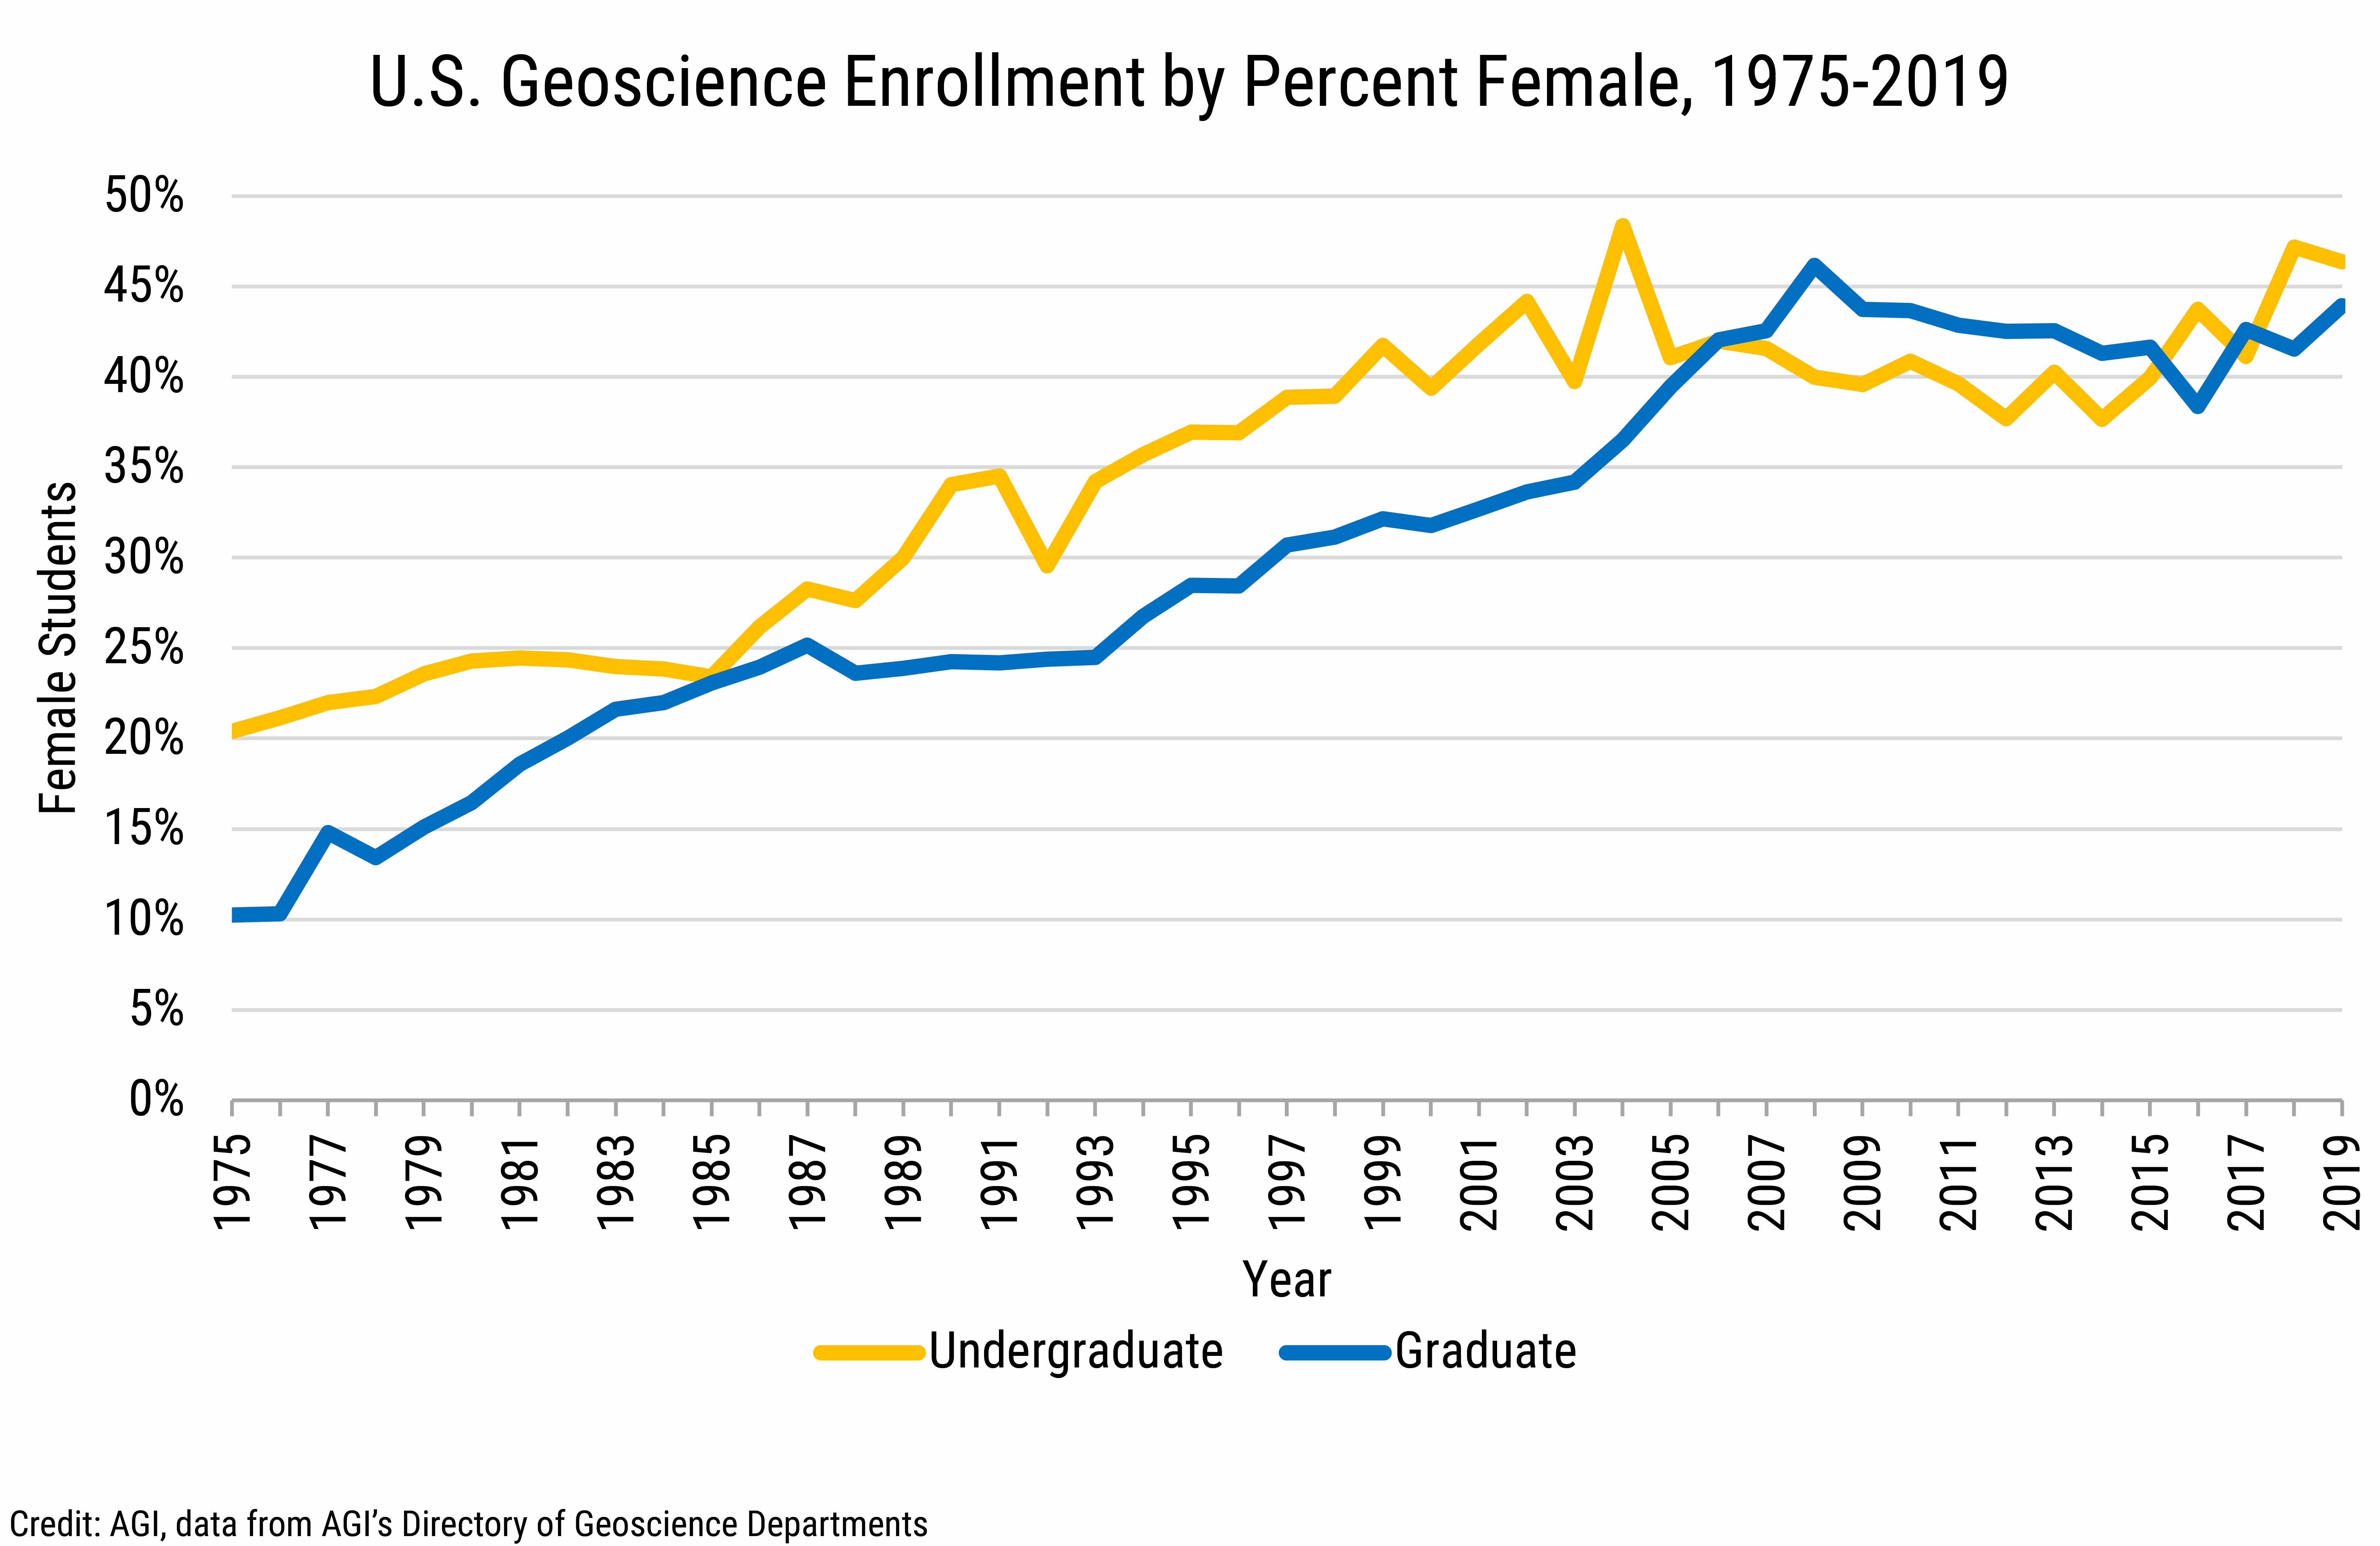 DB2020-023 chart06-US Geoscience Enrollments by Percent Female, 1975-2019 (Credit: AGI, data from AGI’s Directory of Geoscience Departments)